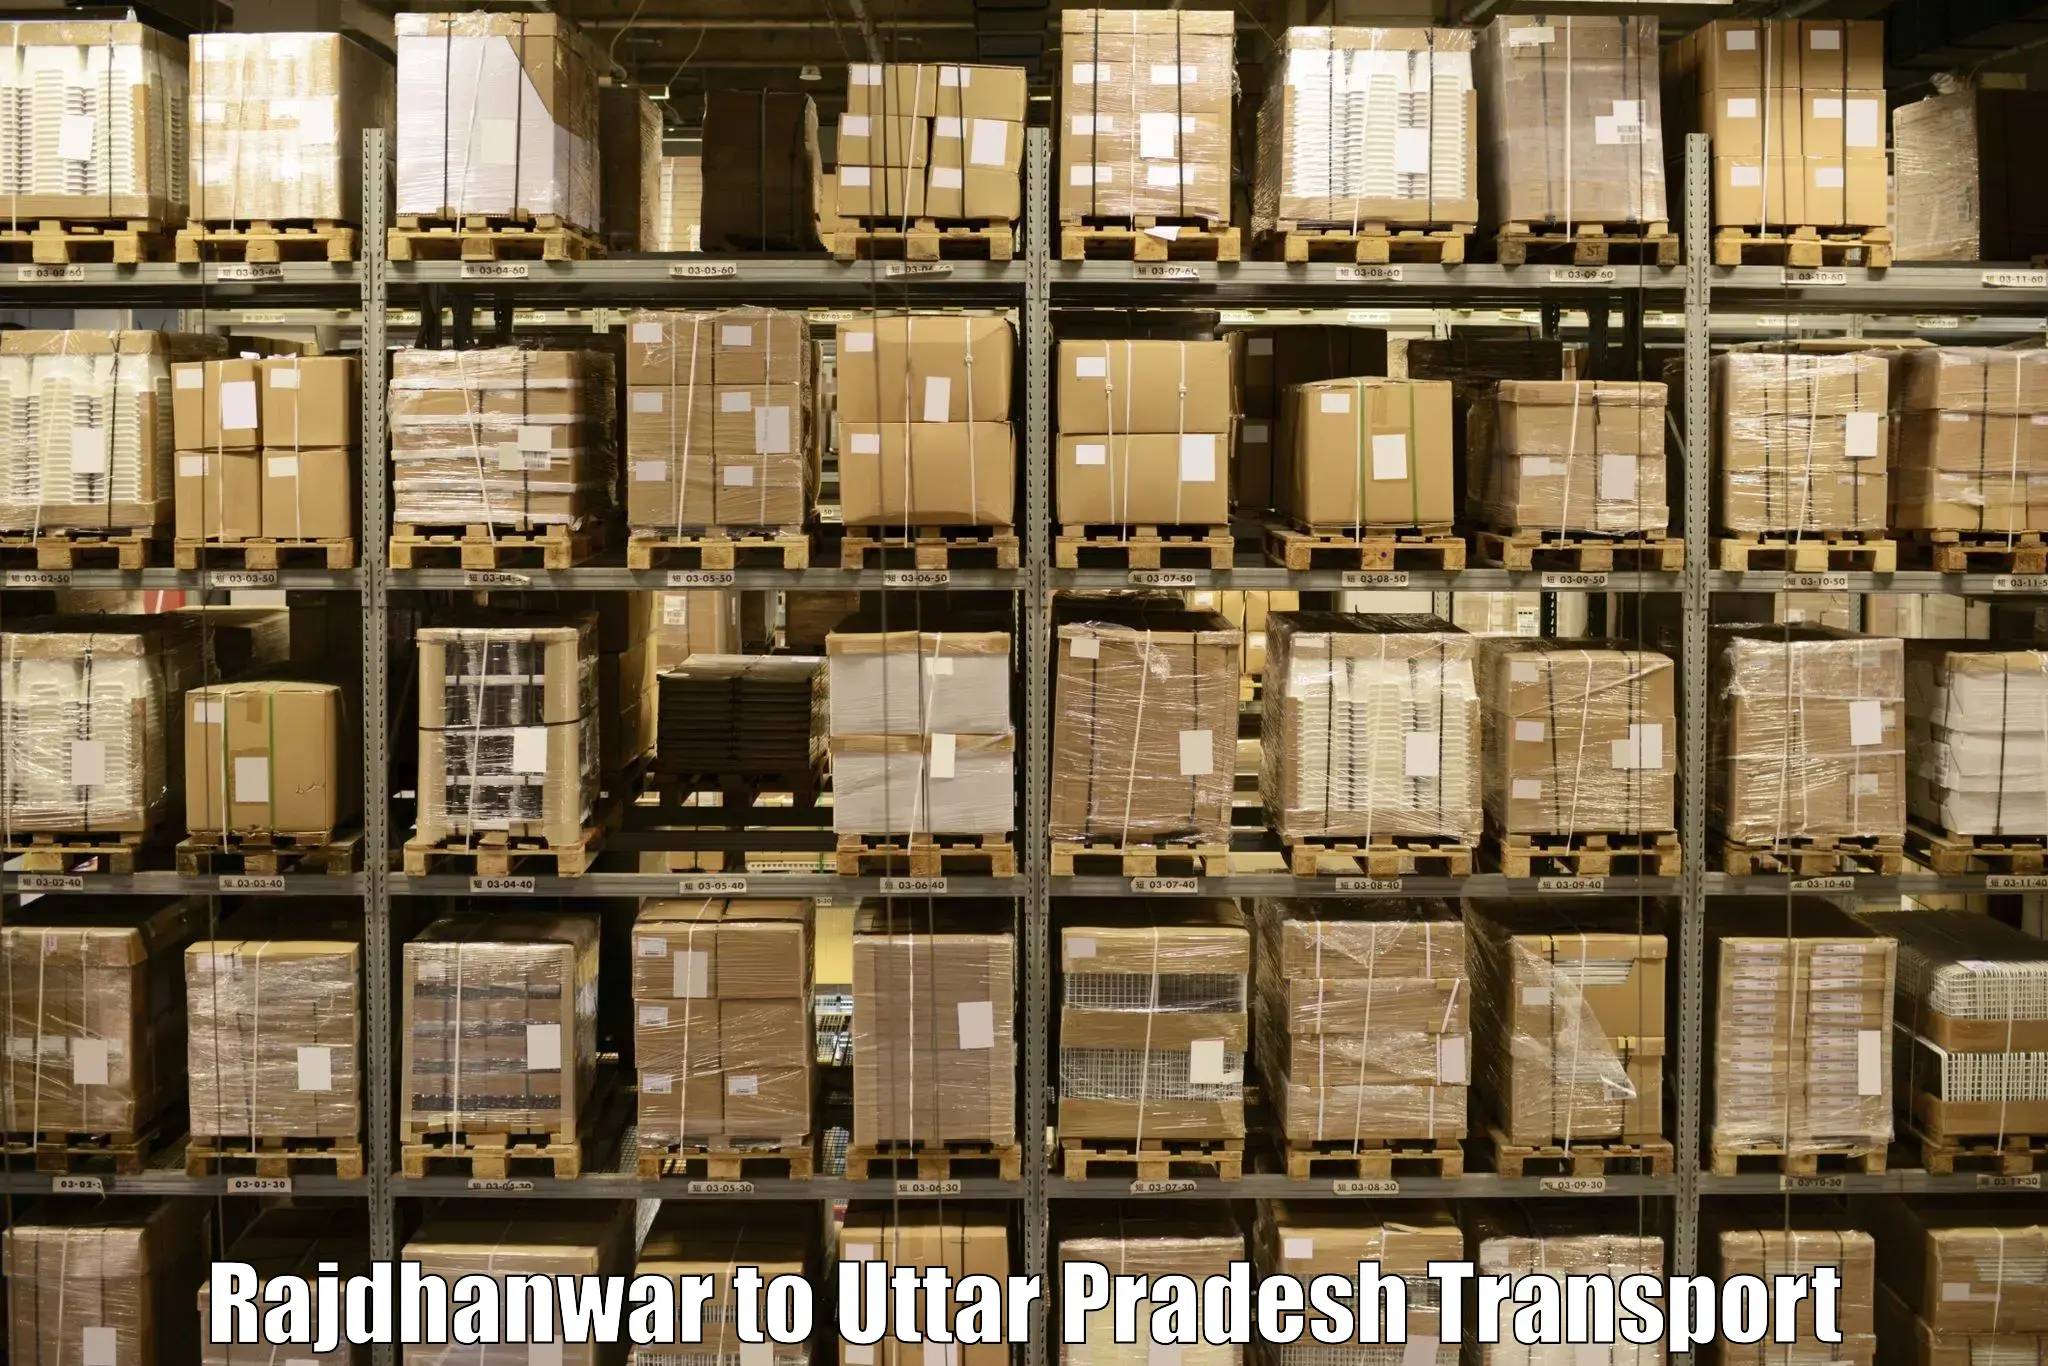 Goods delivery service Rajdhanwar to Shahabad